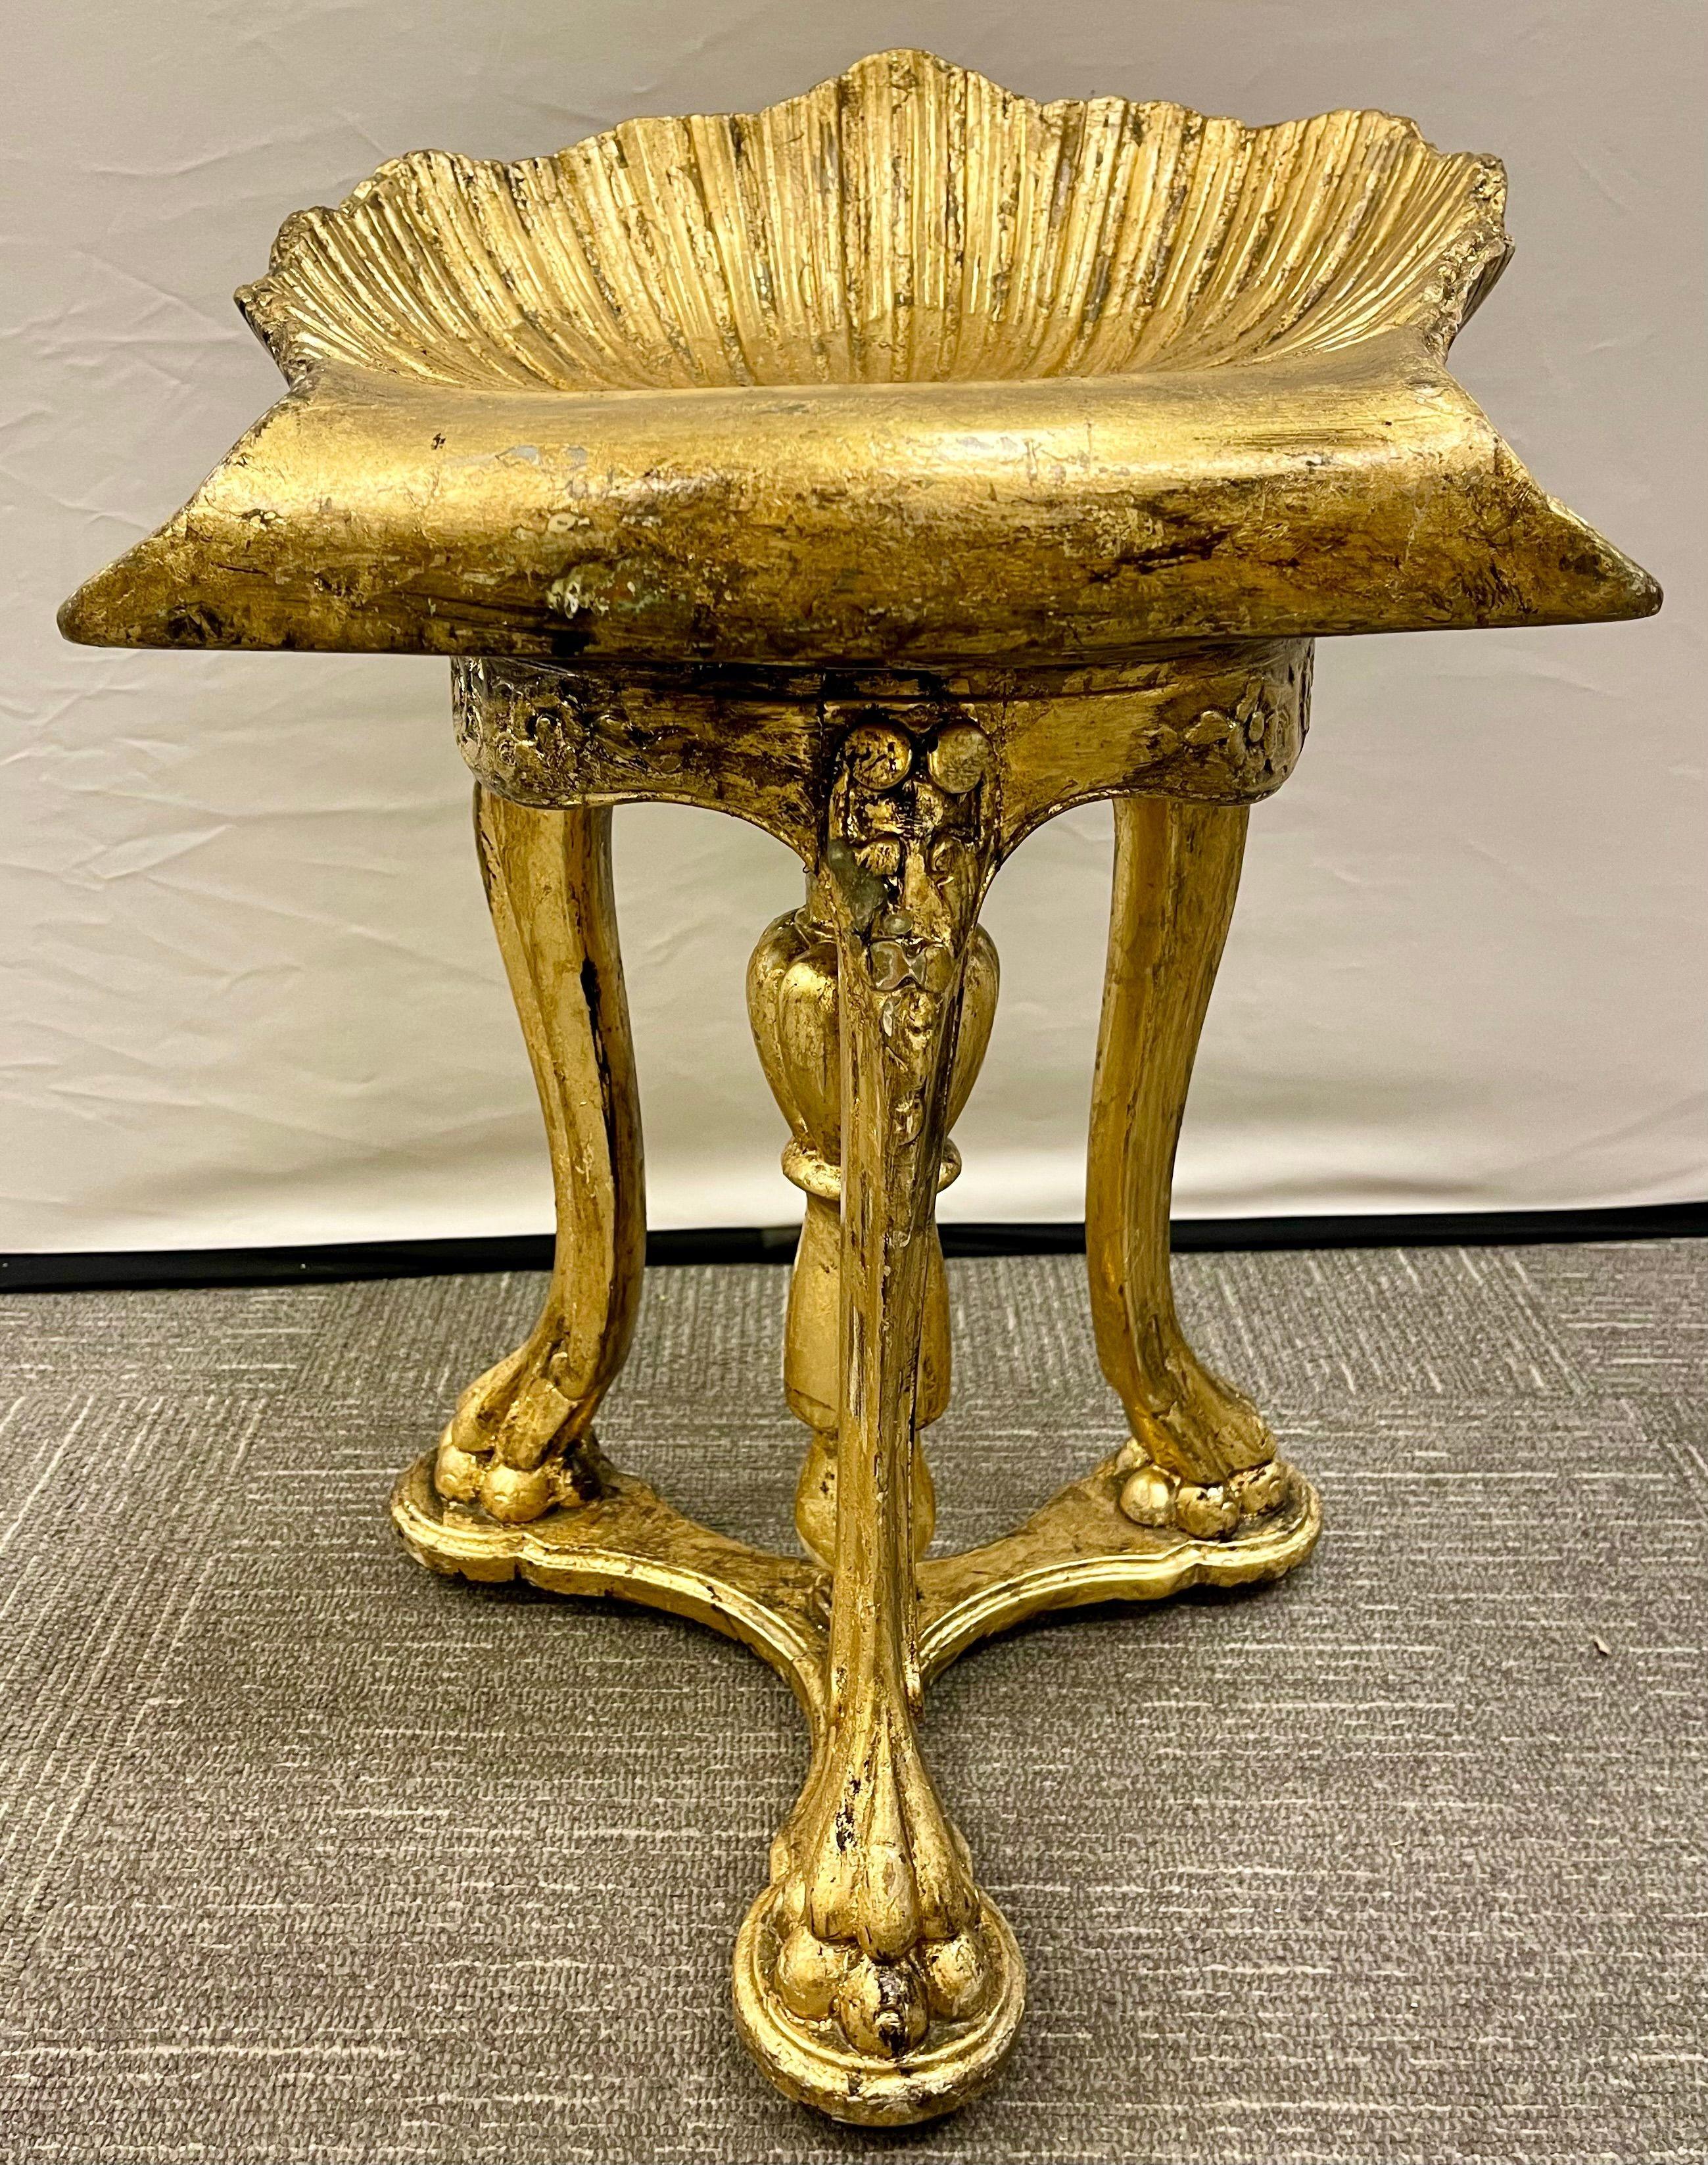 19th Century Grotto Fantasy Stool, Swivel, Italian, Gilt Gold, CIE Pauly Manner In Good Condition In Stamford, CT